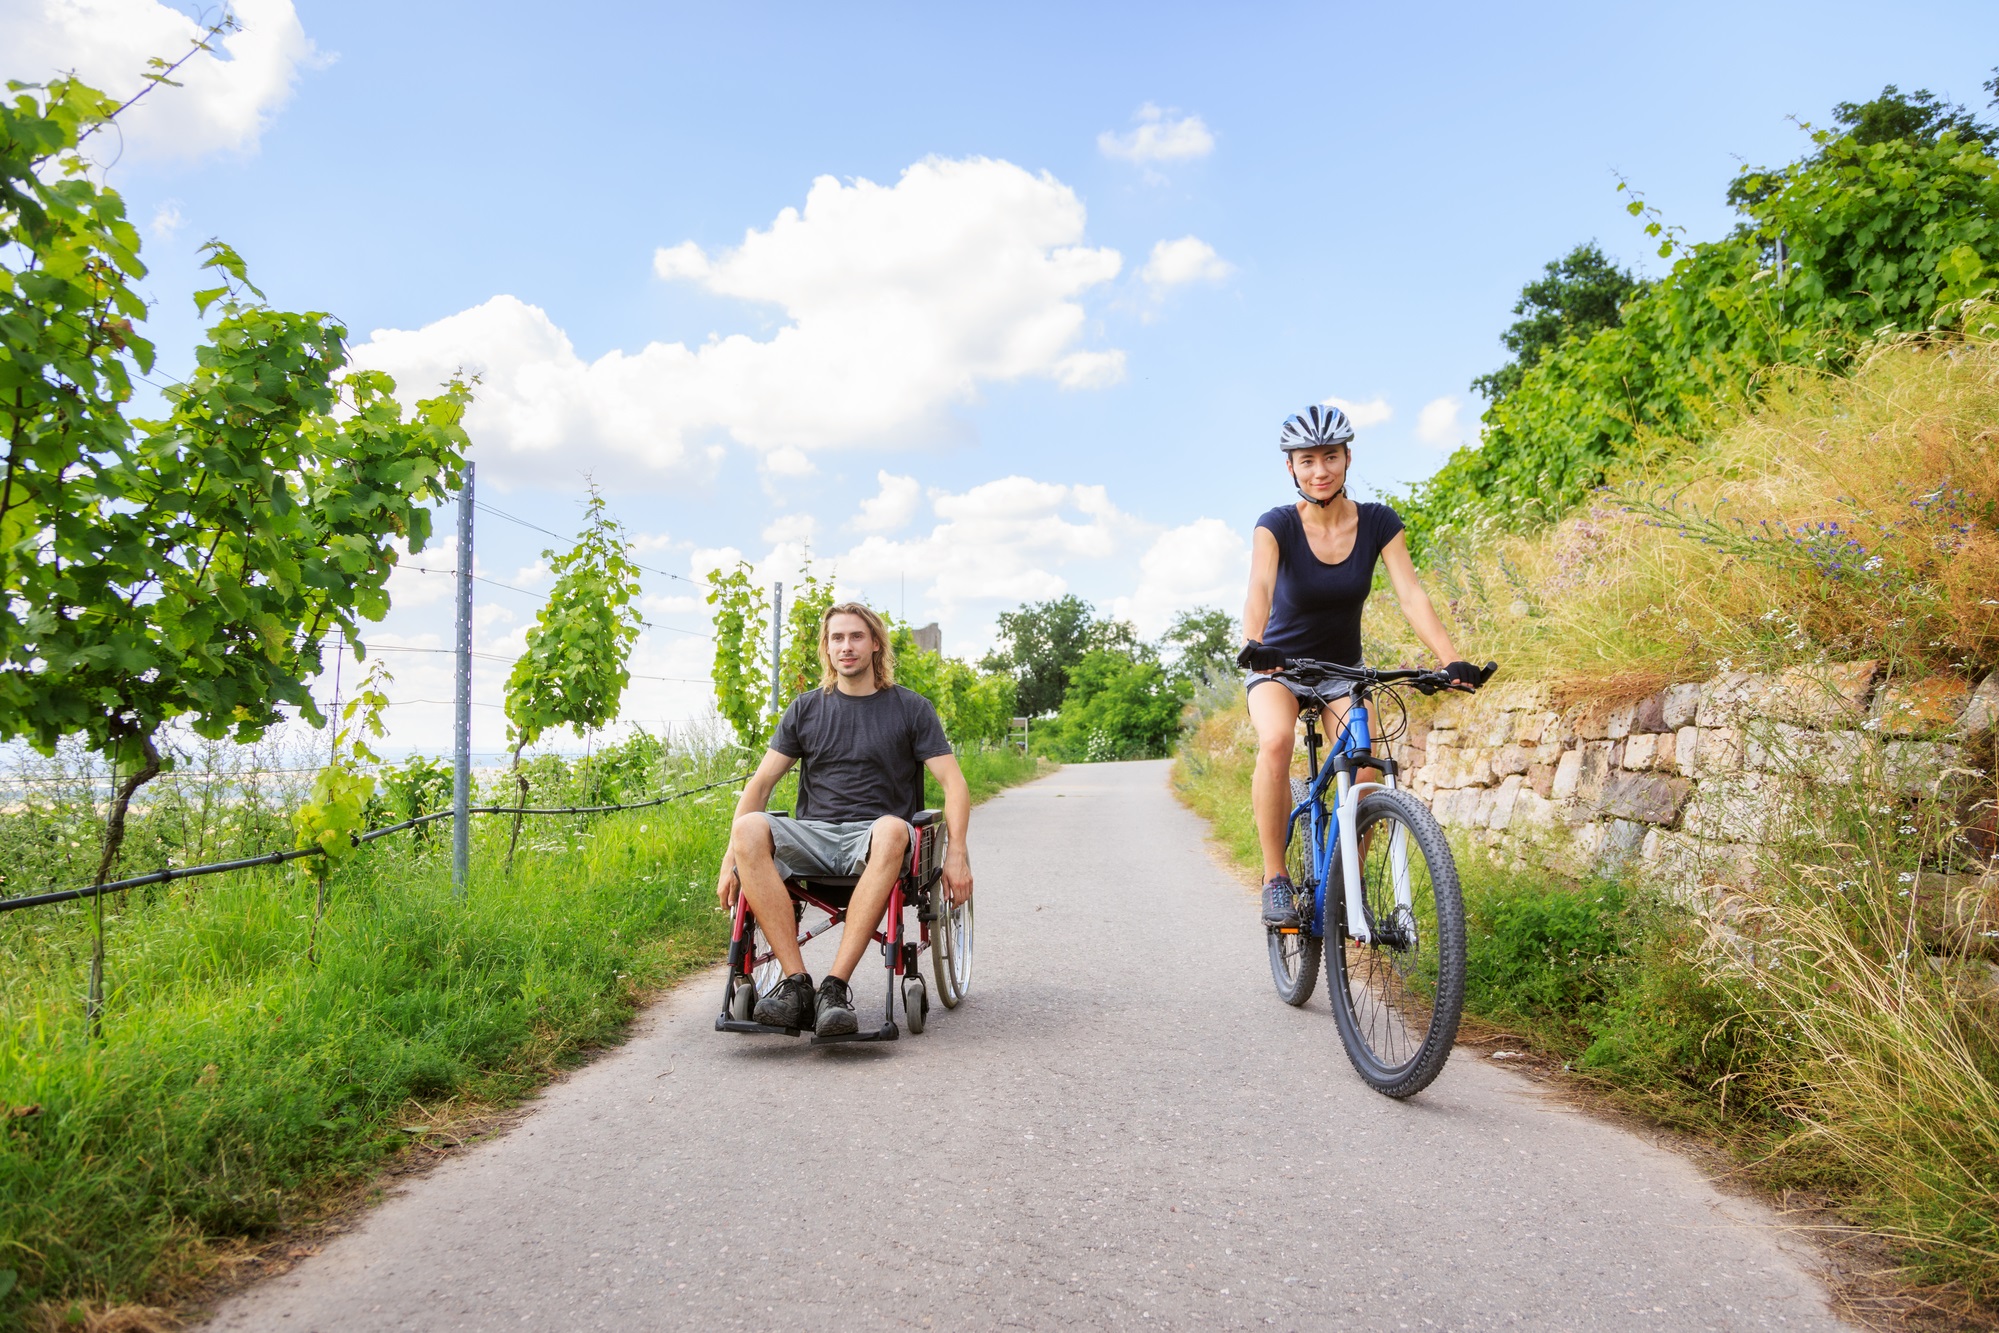 Young couple enjoying time outdoors. She is cycling, he is sitting in a wheelchair.